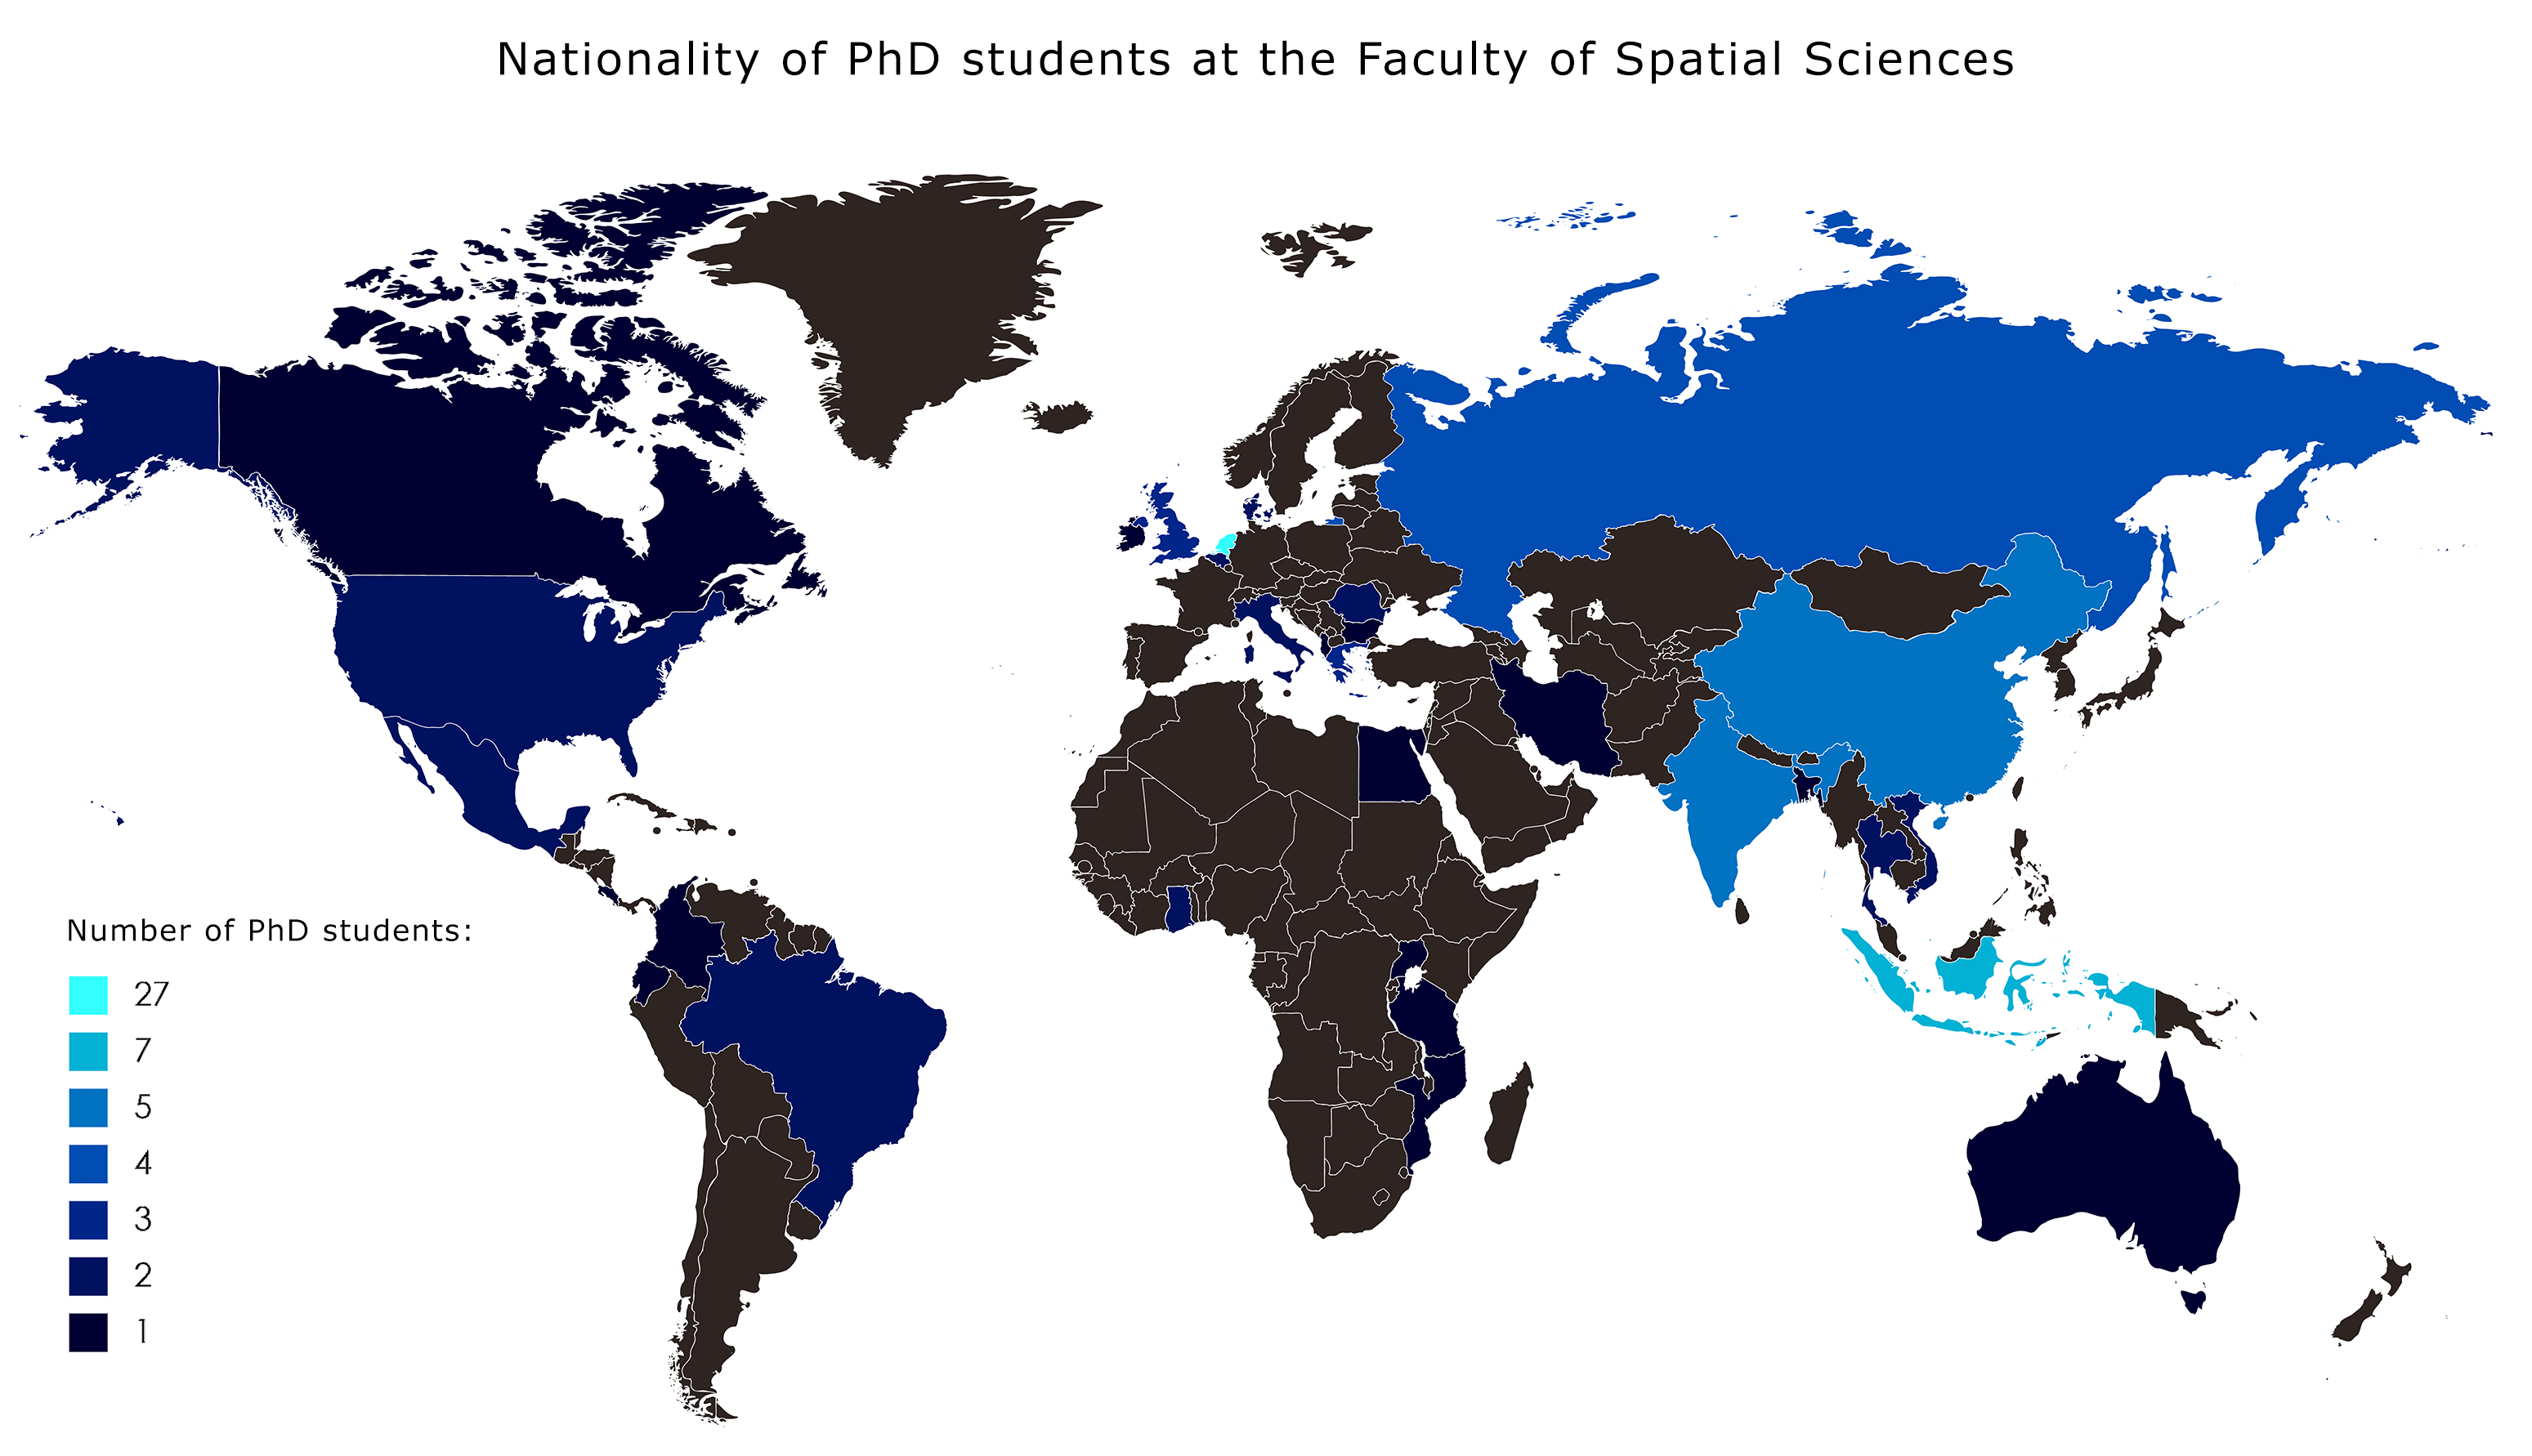 Nationality of PhD students at the Faculty of Spatial Sciences